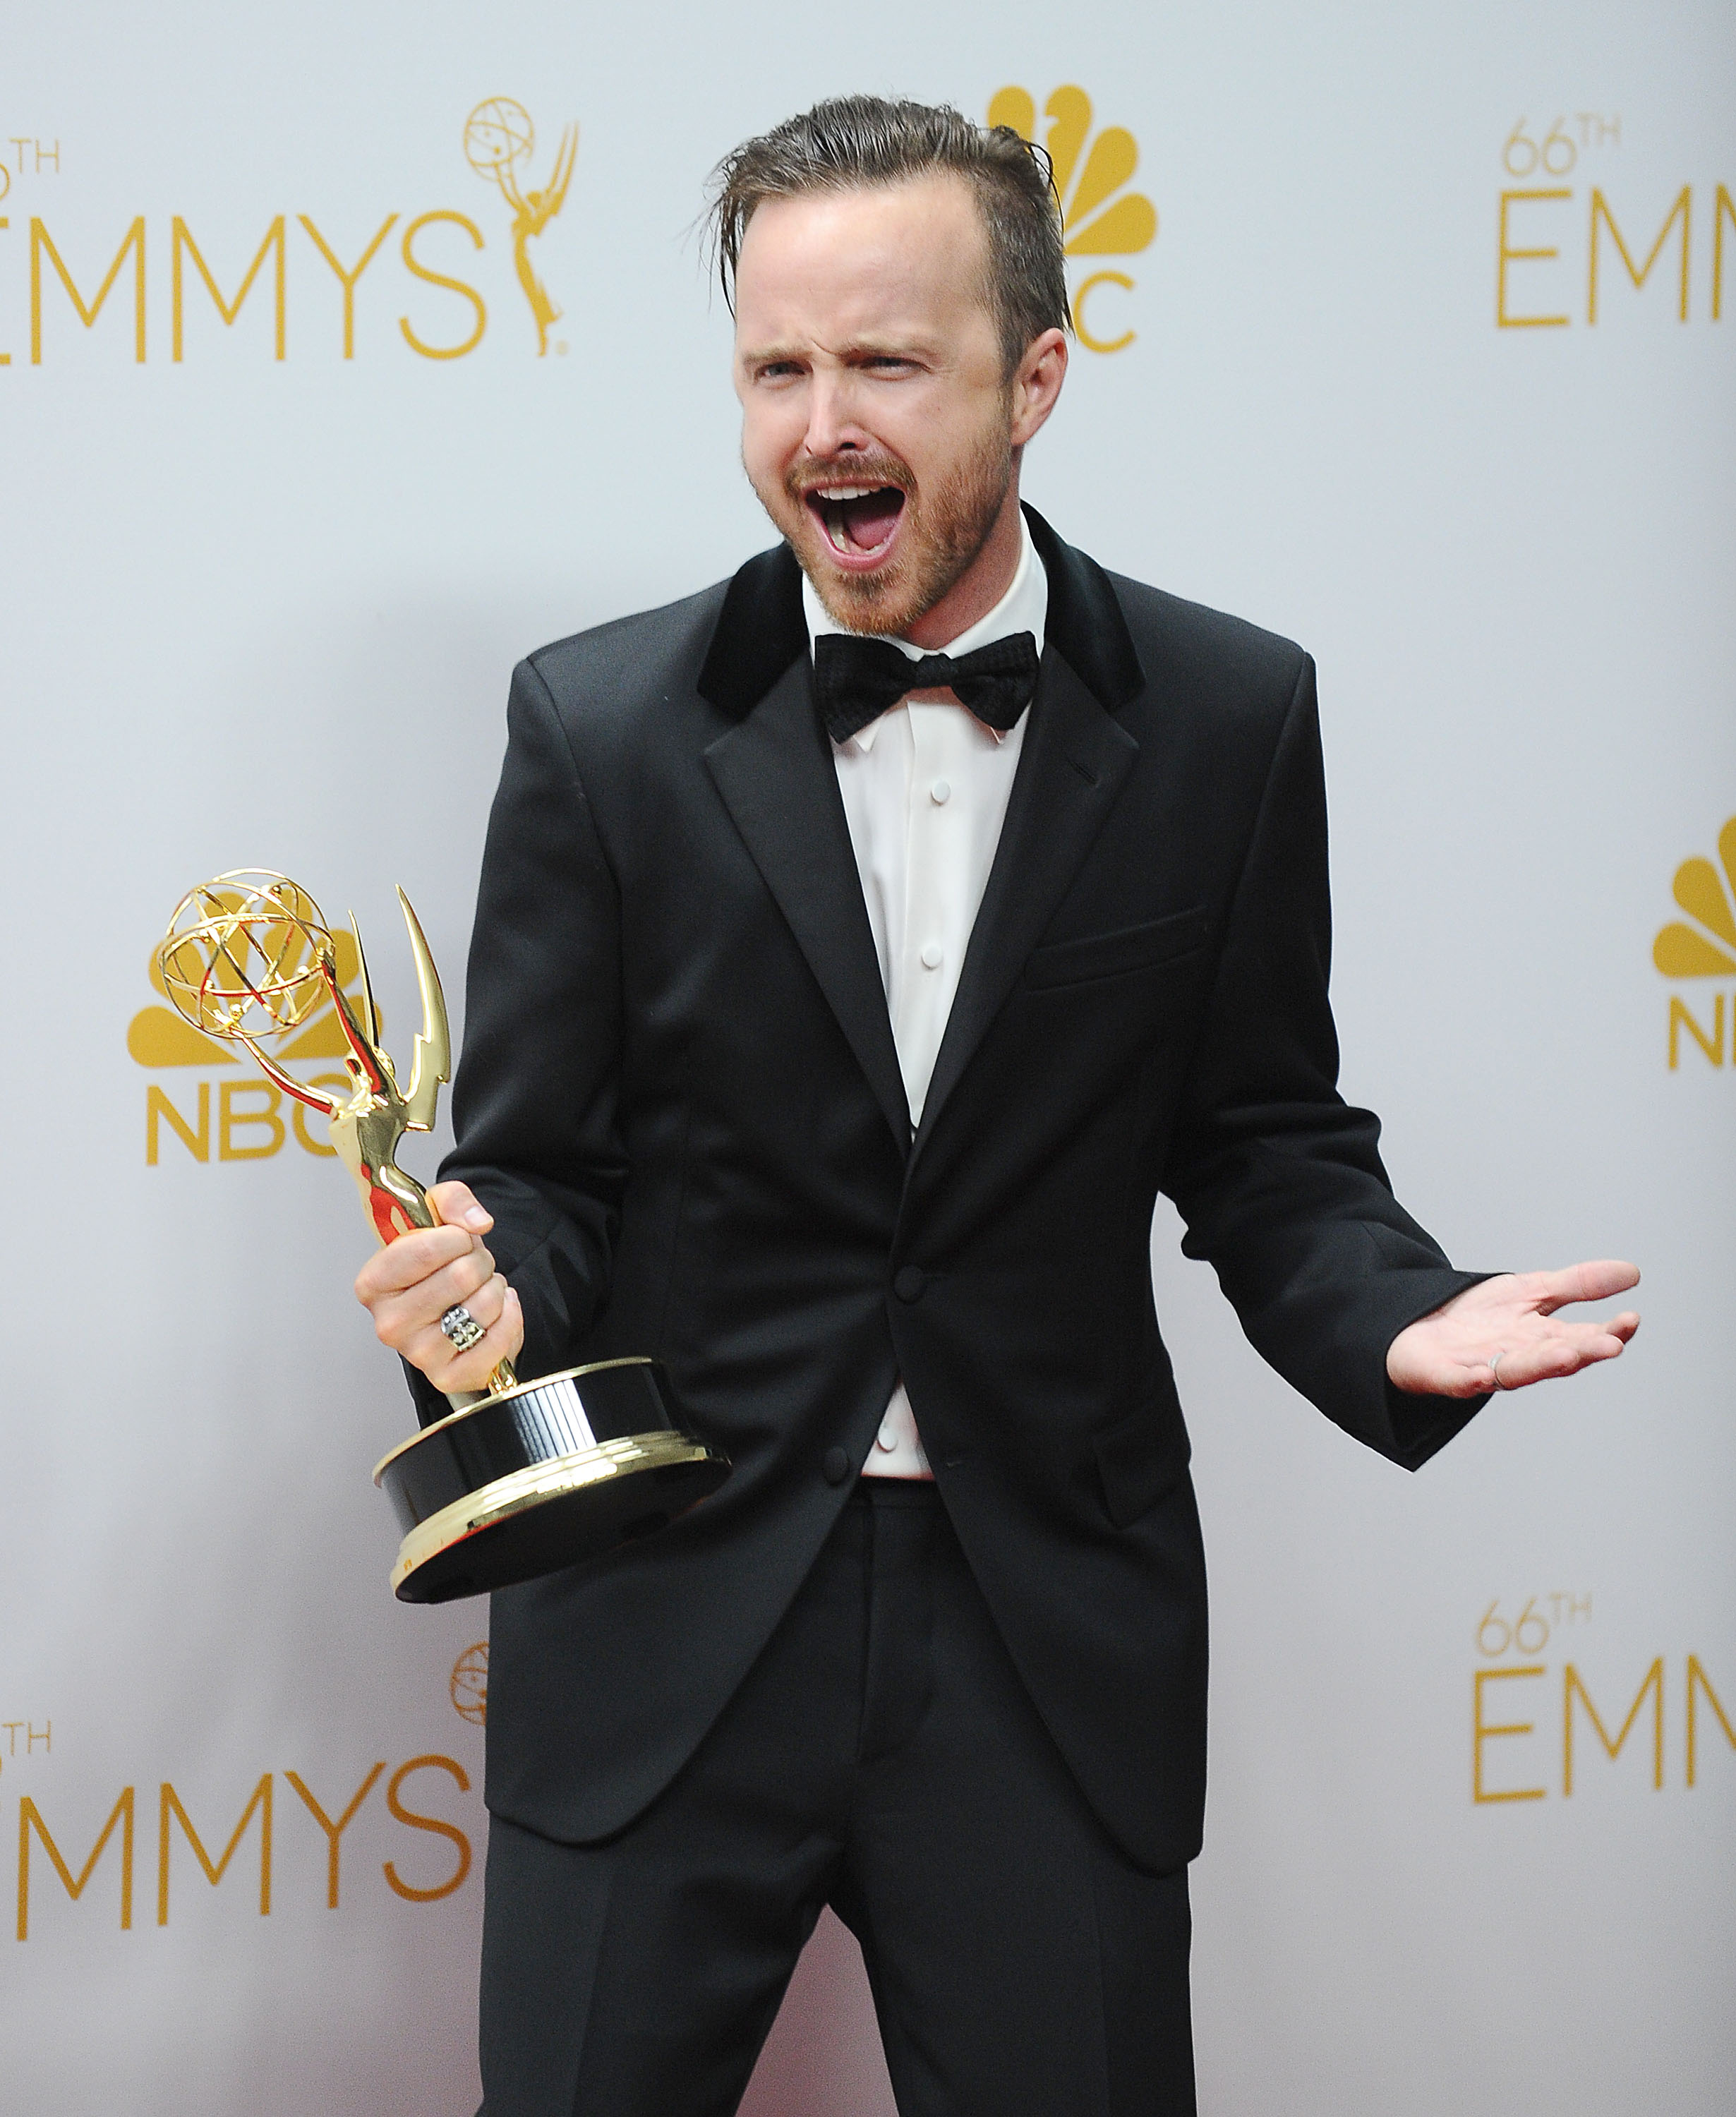 Actor Aaron Paul poses in the press room at the 66th annual Primetime Emmy Awards at Nokia Theatre L.A. Live on August 25, 2014 in Los Angeles, California. (Jason LaVeris&mdash;FilmMagic/Getty Images)